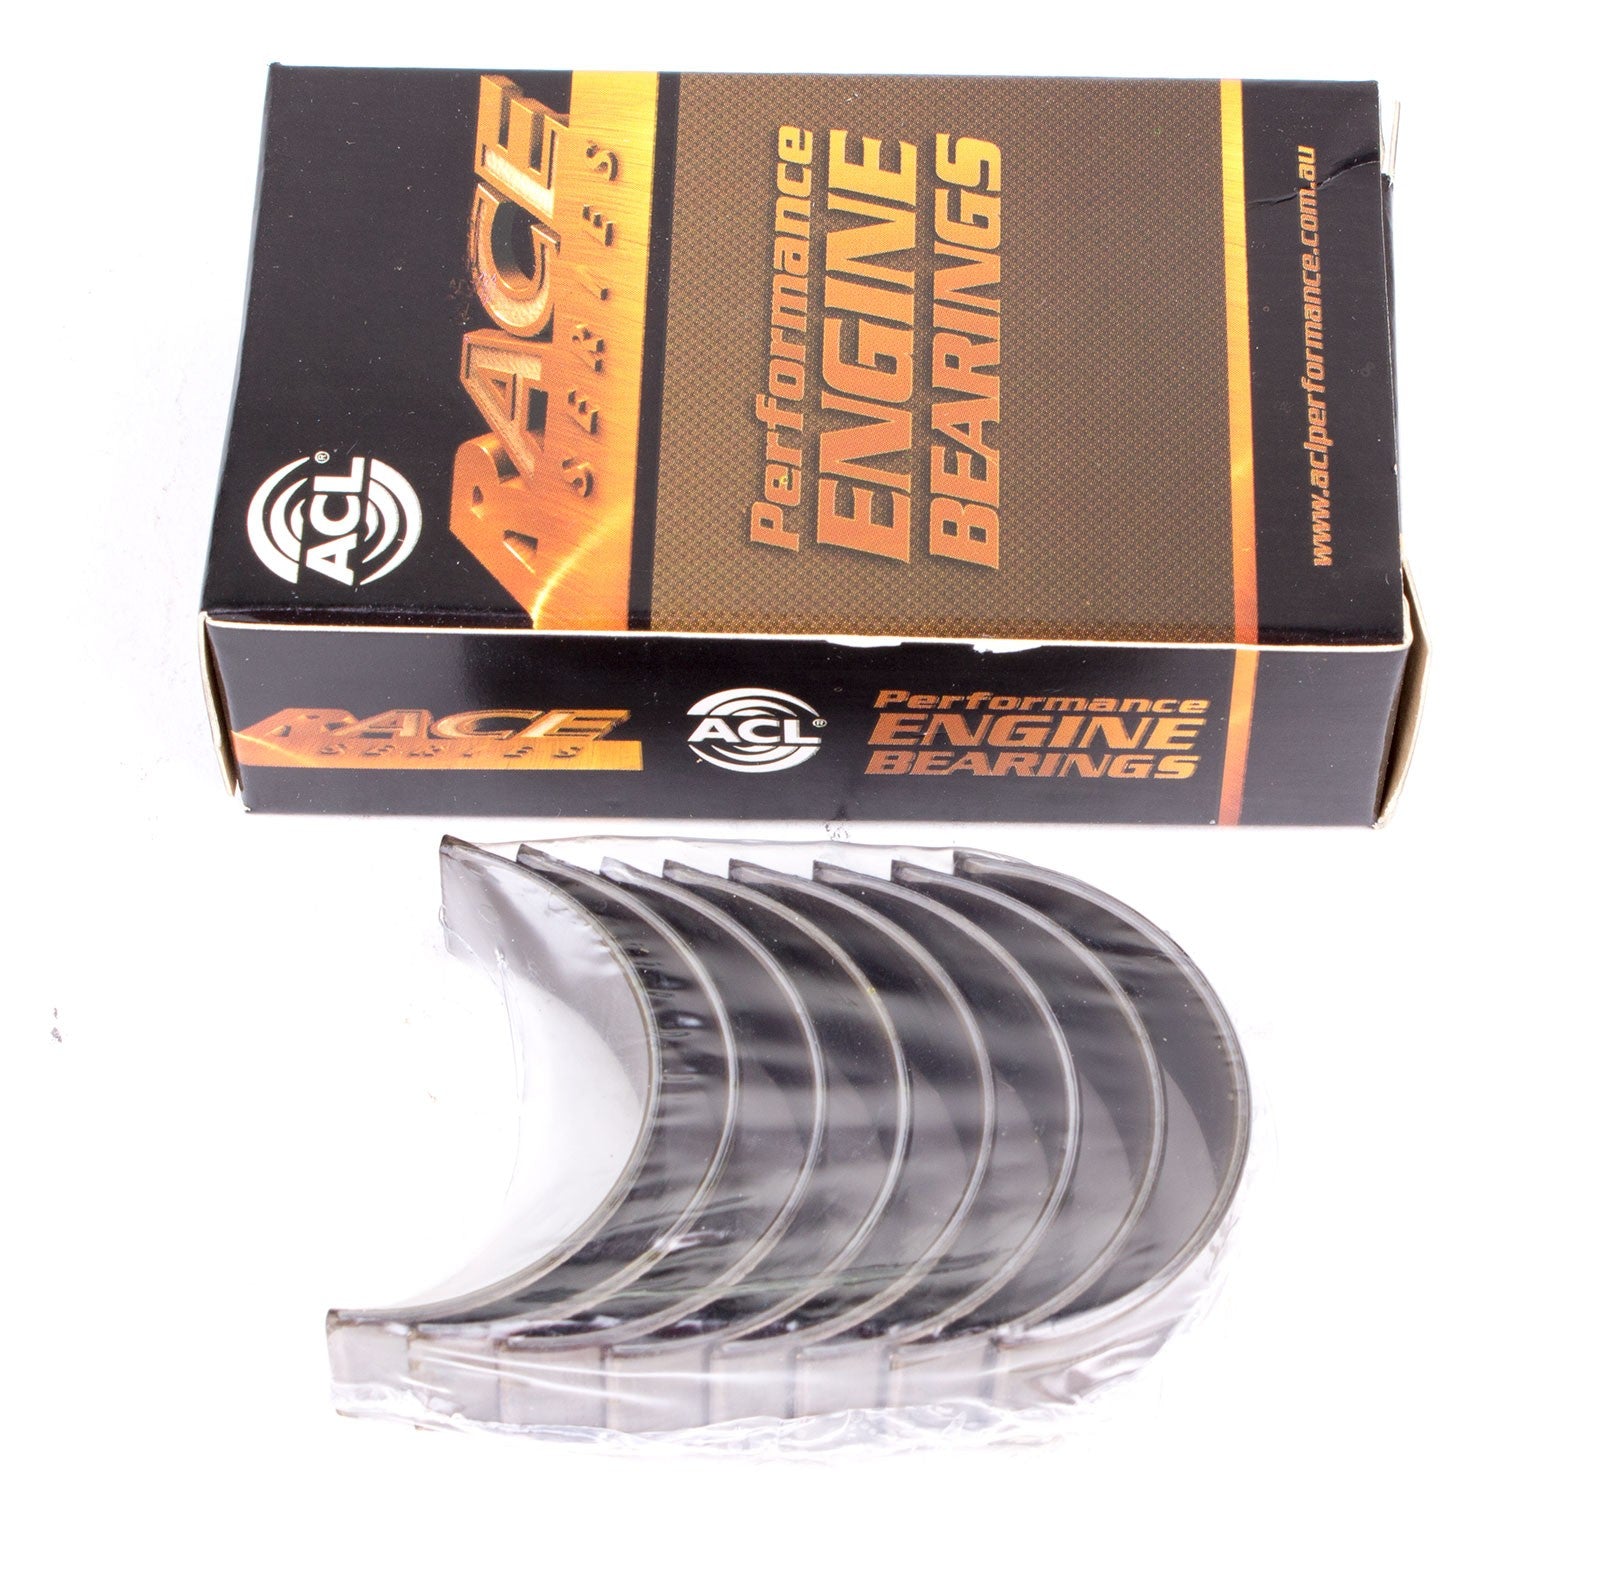 ACL 5M8443H-.25 Main bearing set (ACL Race Series) Photo-0 